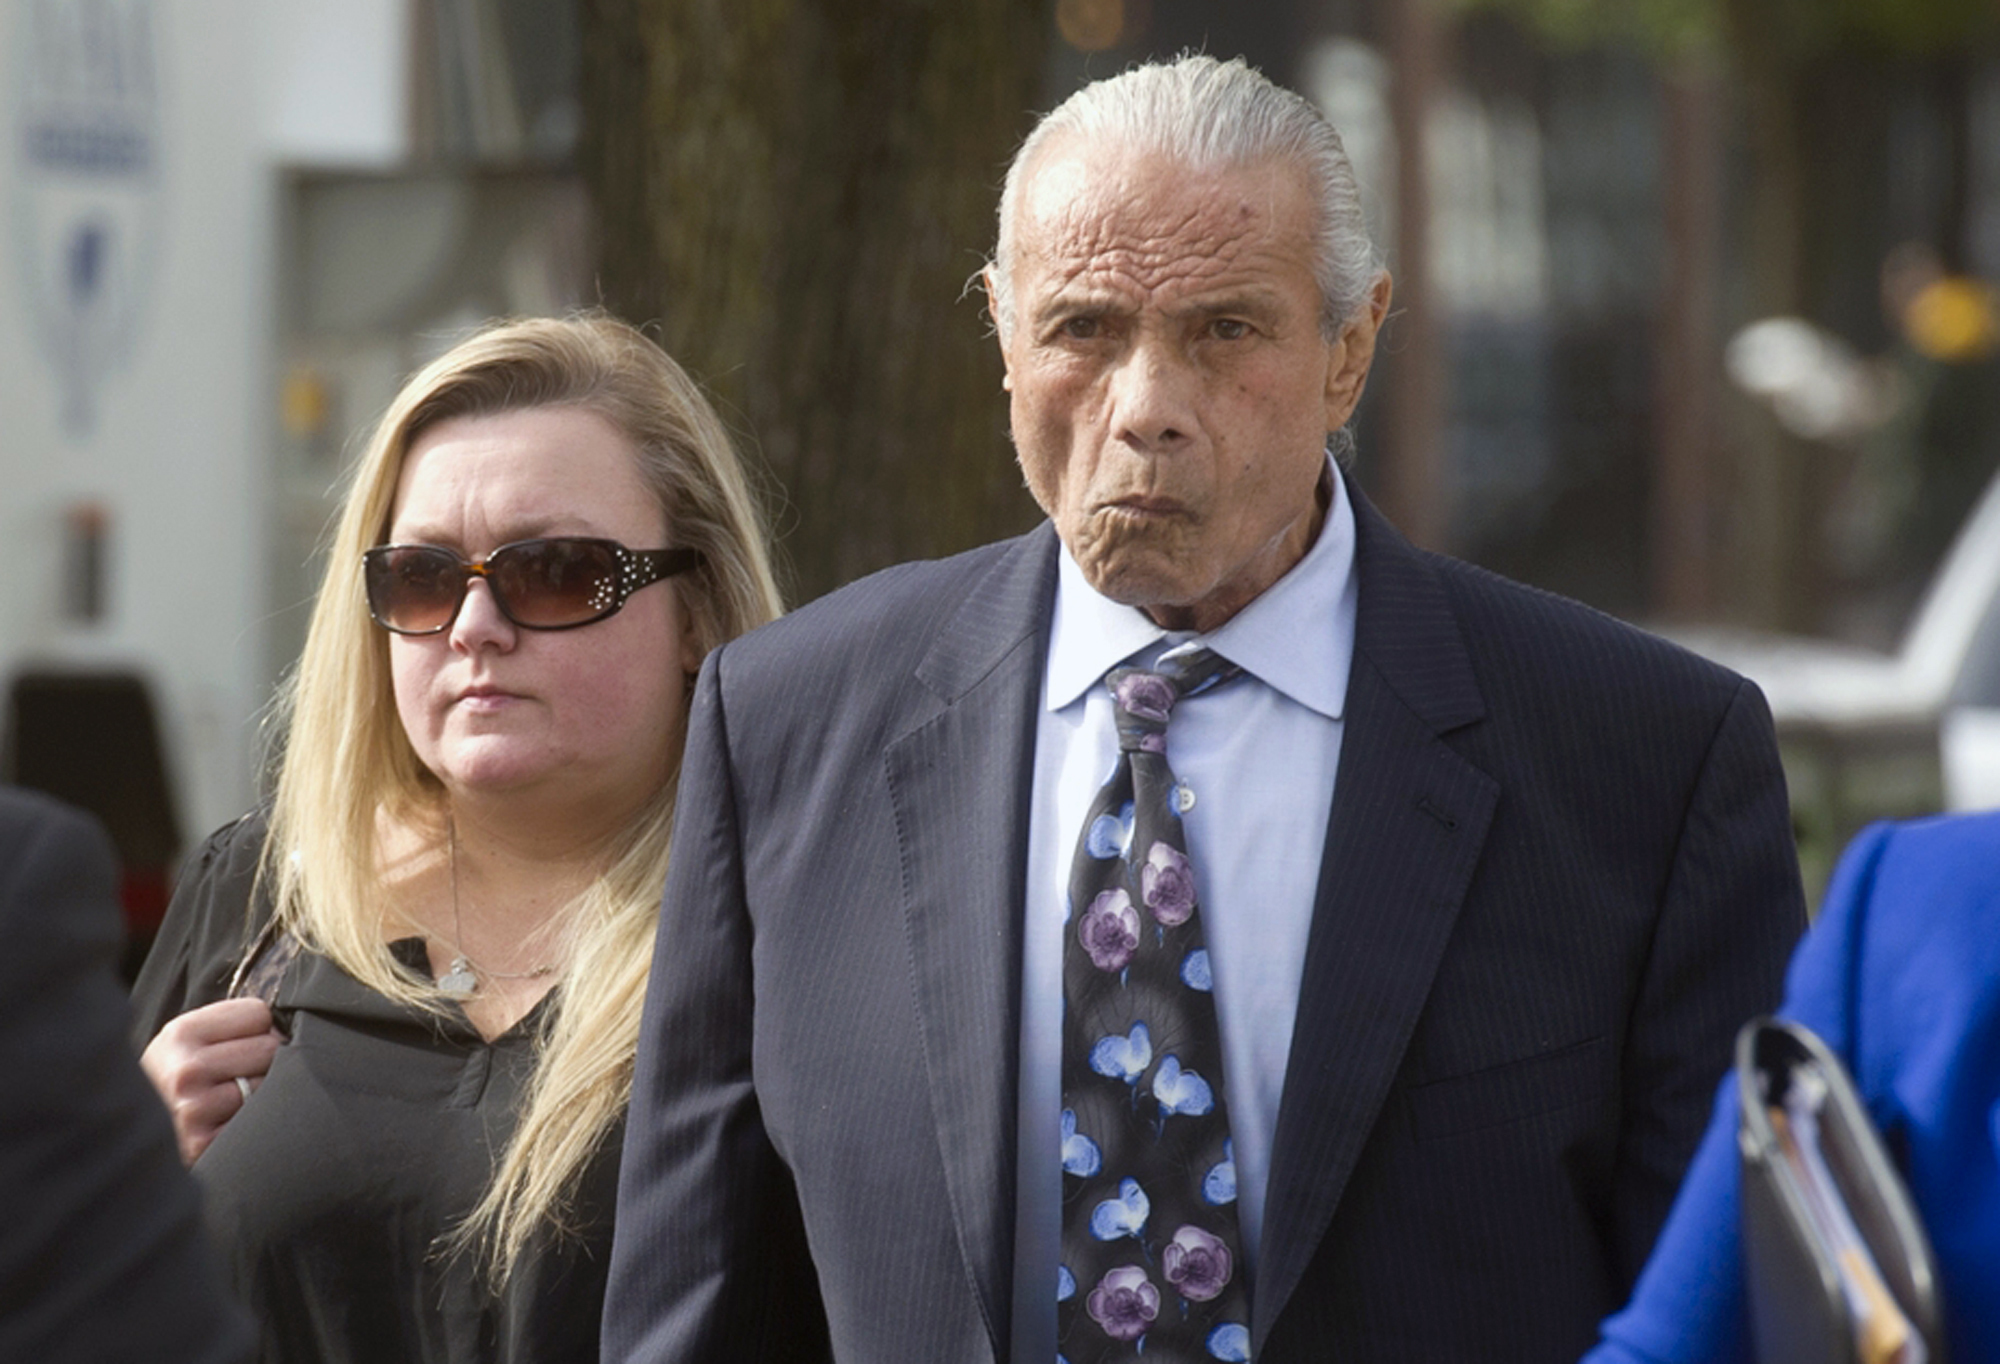 Jimmy Snuka was charged with manslaughter